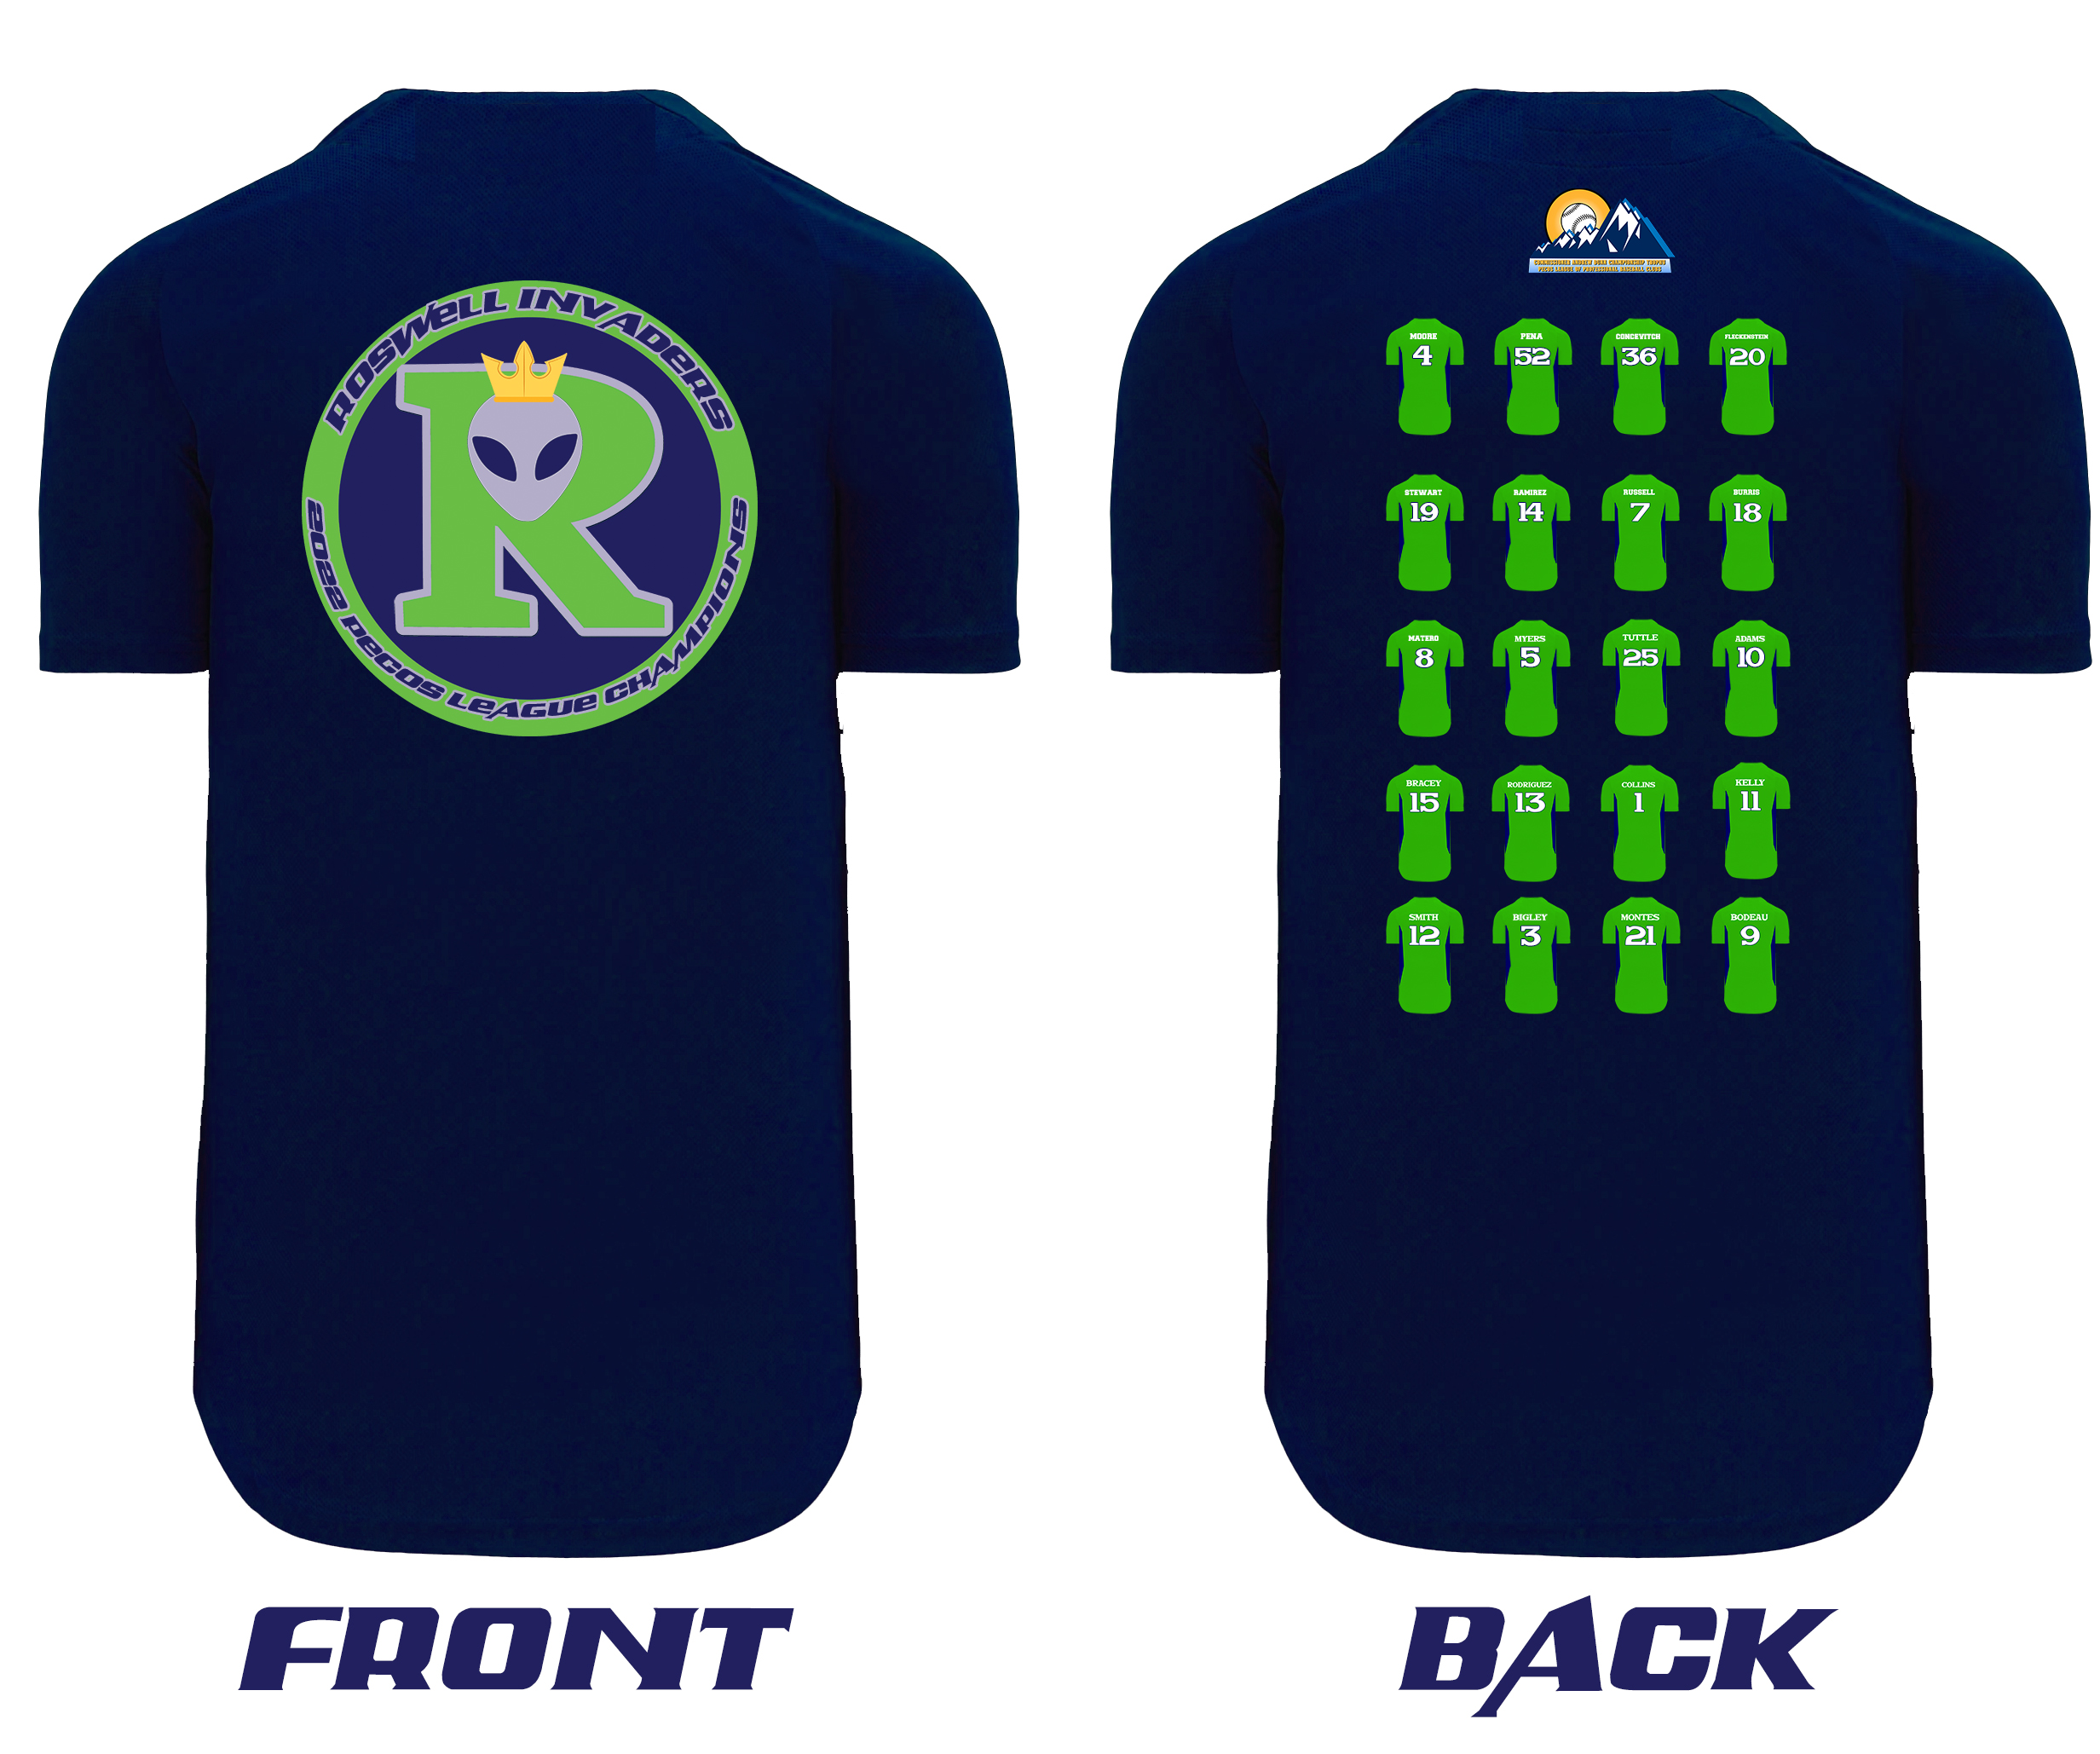 http://www.roswellinvaders.com/images/tshirts/roswell2022Championship2500.jpg